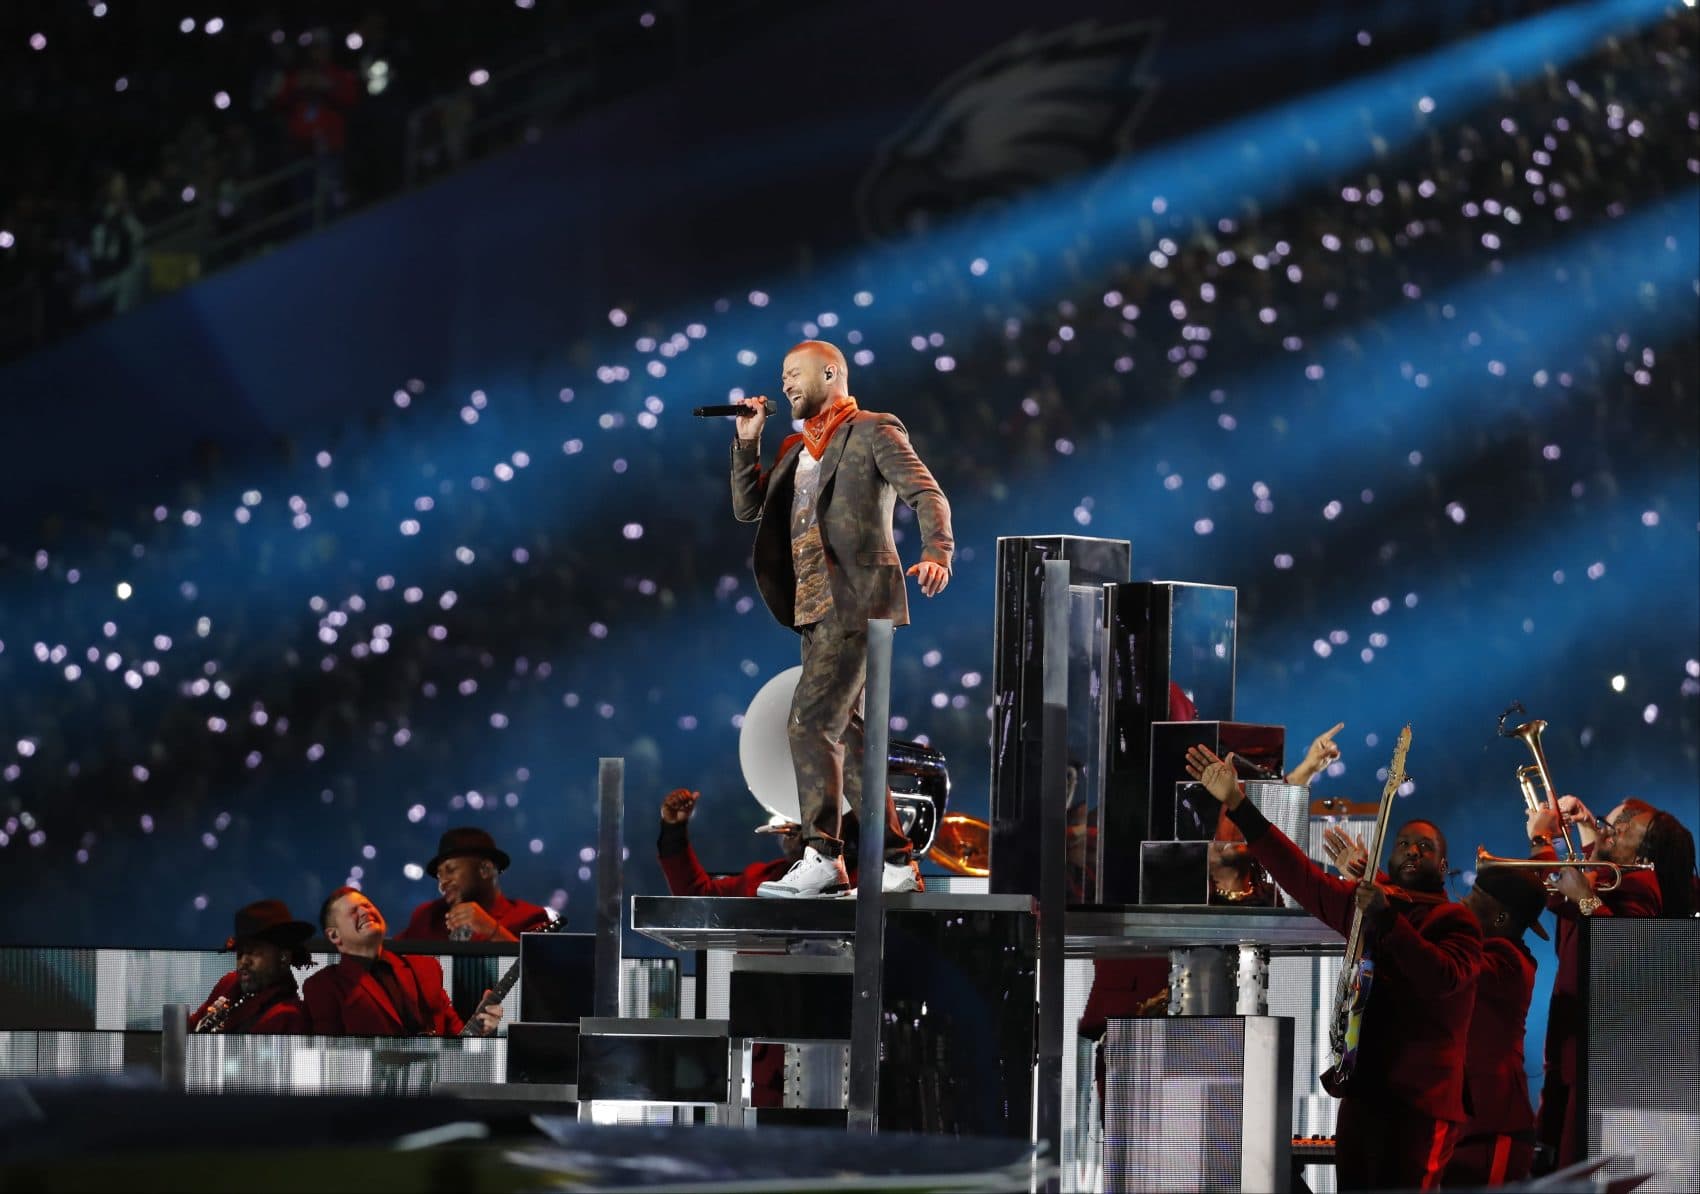 Justin Timberlake performs during halftime at the NFL Super Bowl 52 football game between the Philadelphia Eagles and the New England Patriots,Sunday, Feb. 4, 2018, in Minneapolis. (AP Photo/Charlie Neibergall)